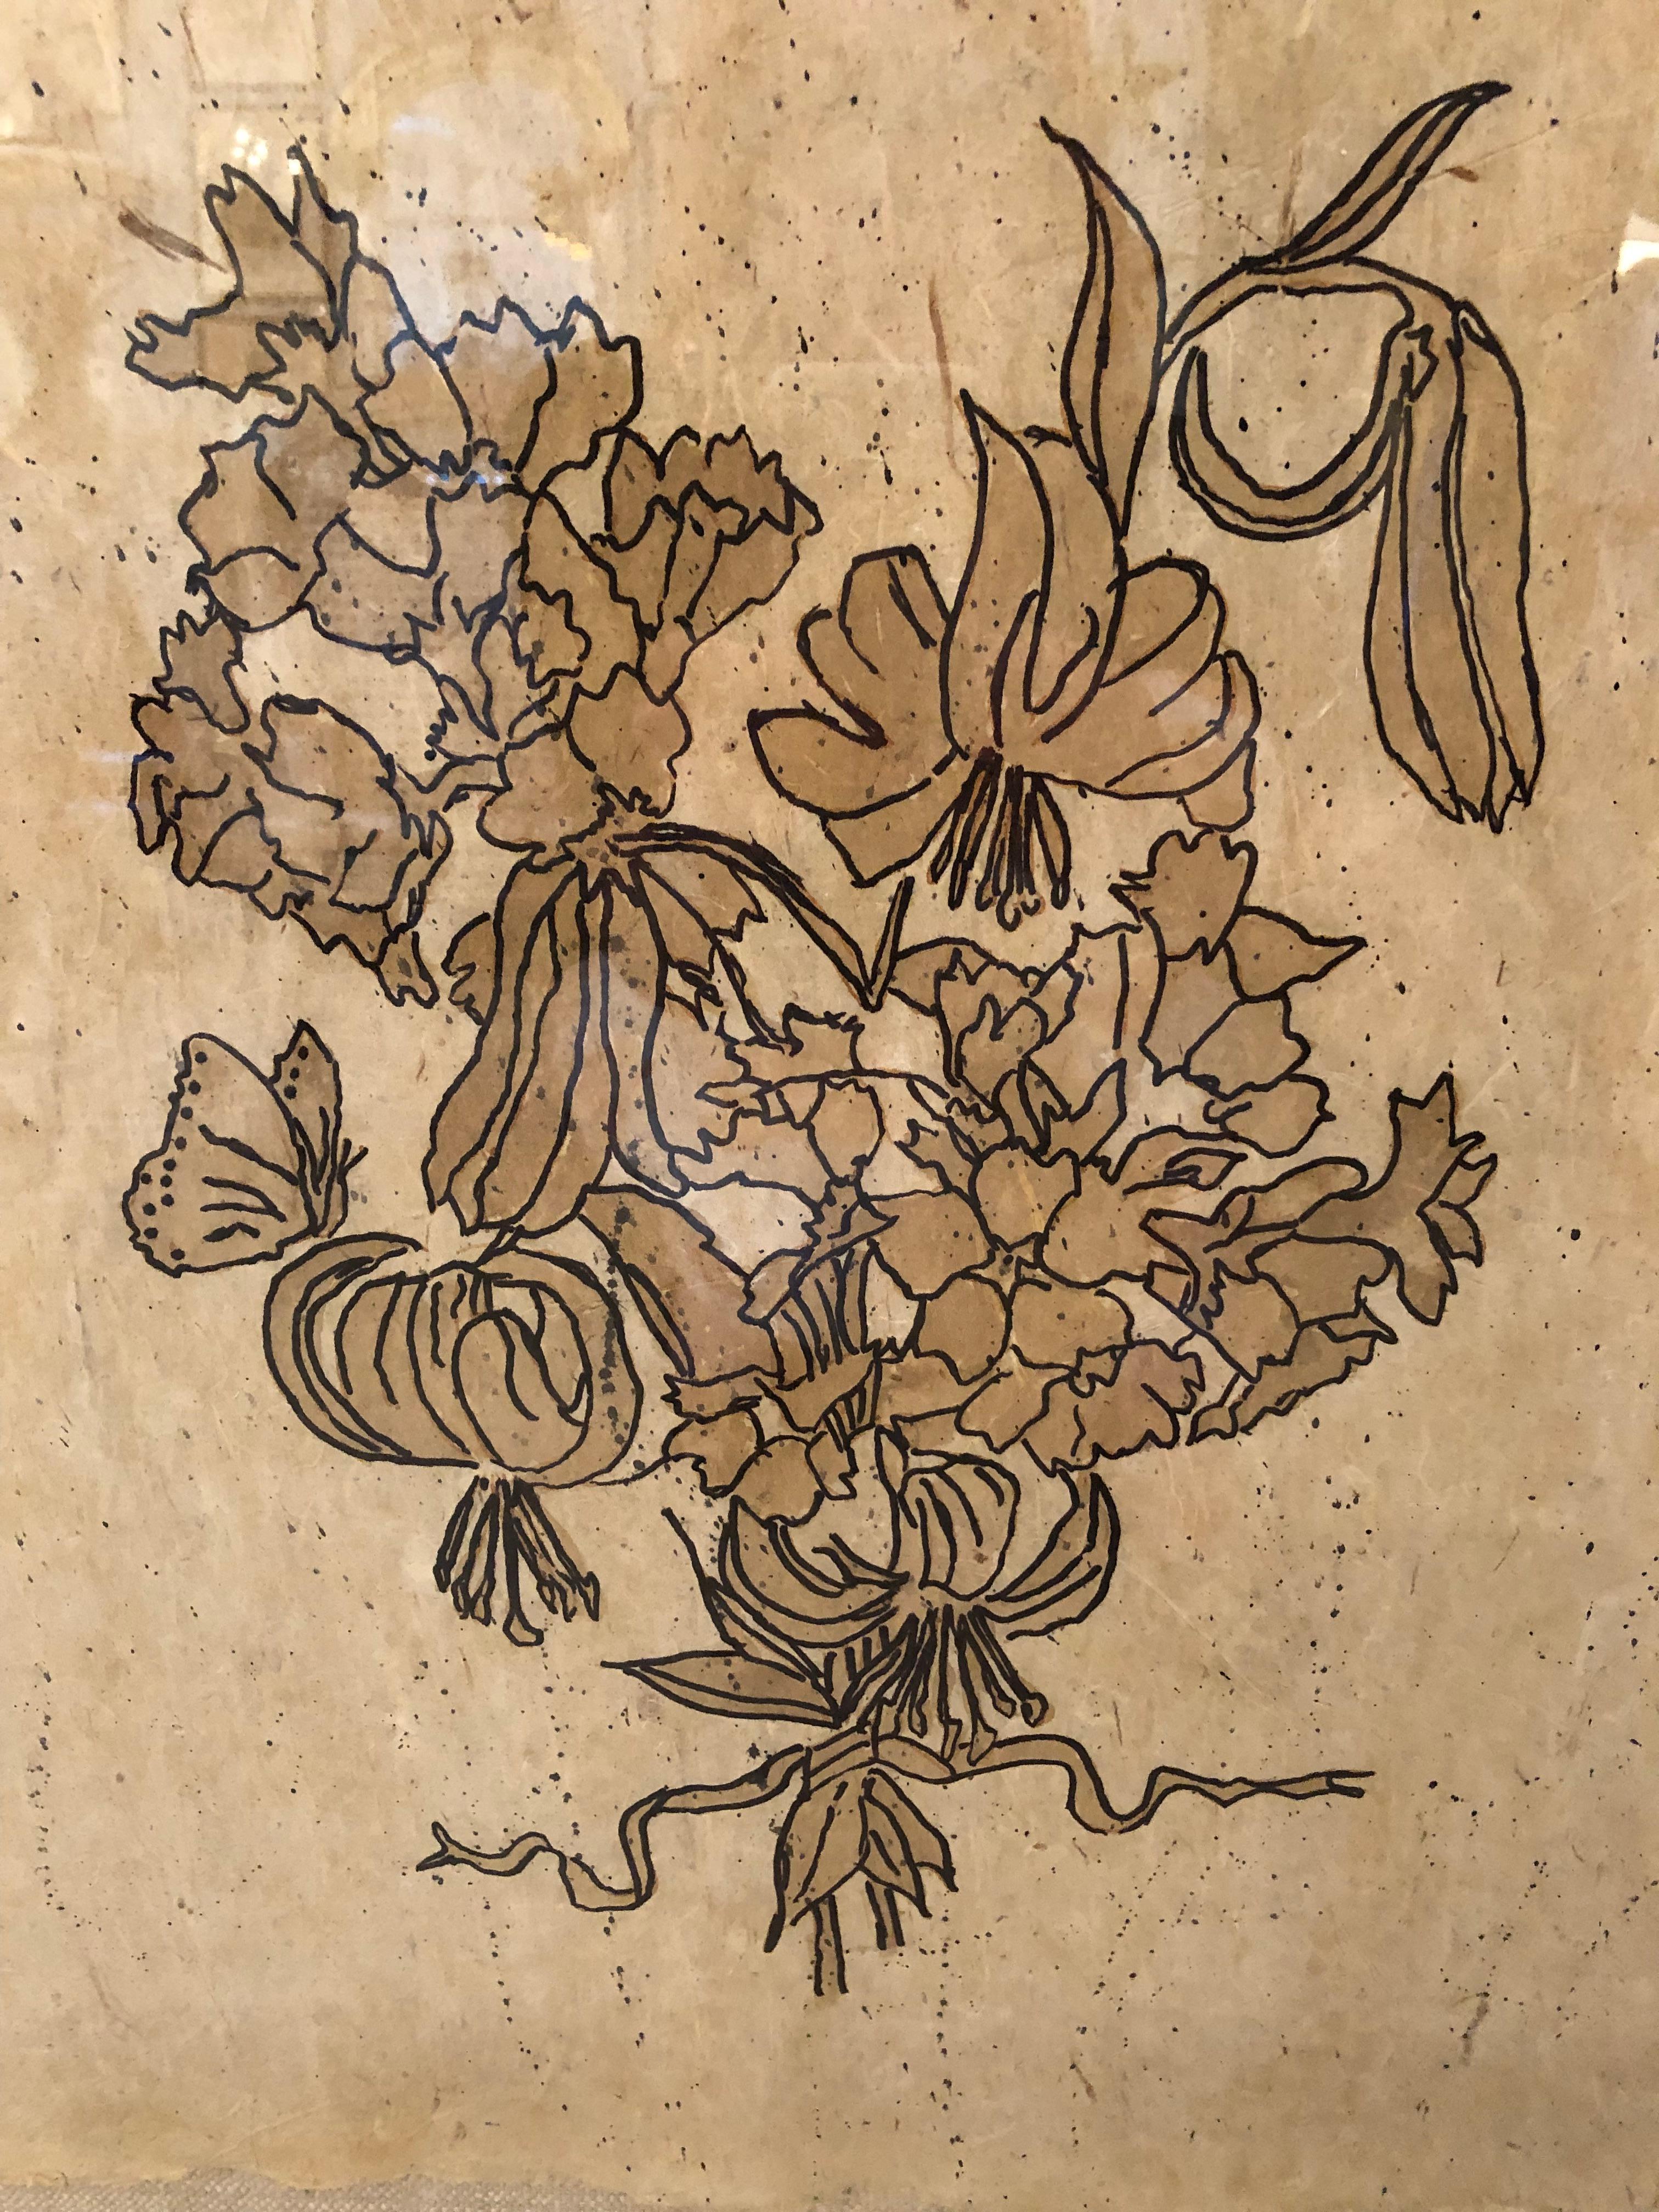 Elegant large pair of beautifully rendered spare bunches of flowers with a sepia palette painted on parchment, handsomely matted against burlap and in wide black slightly rustic wooden frames.